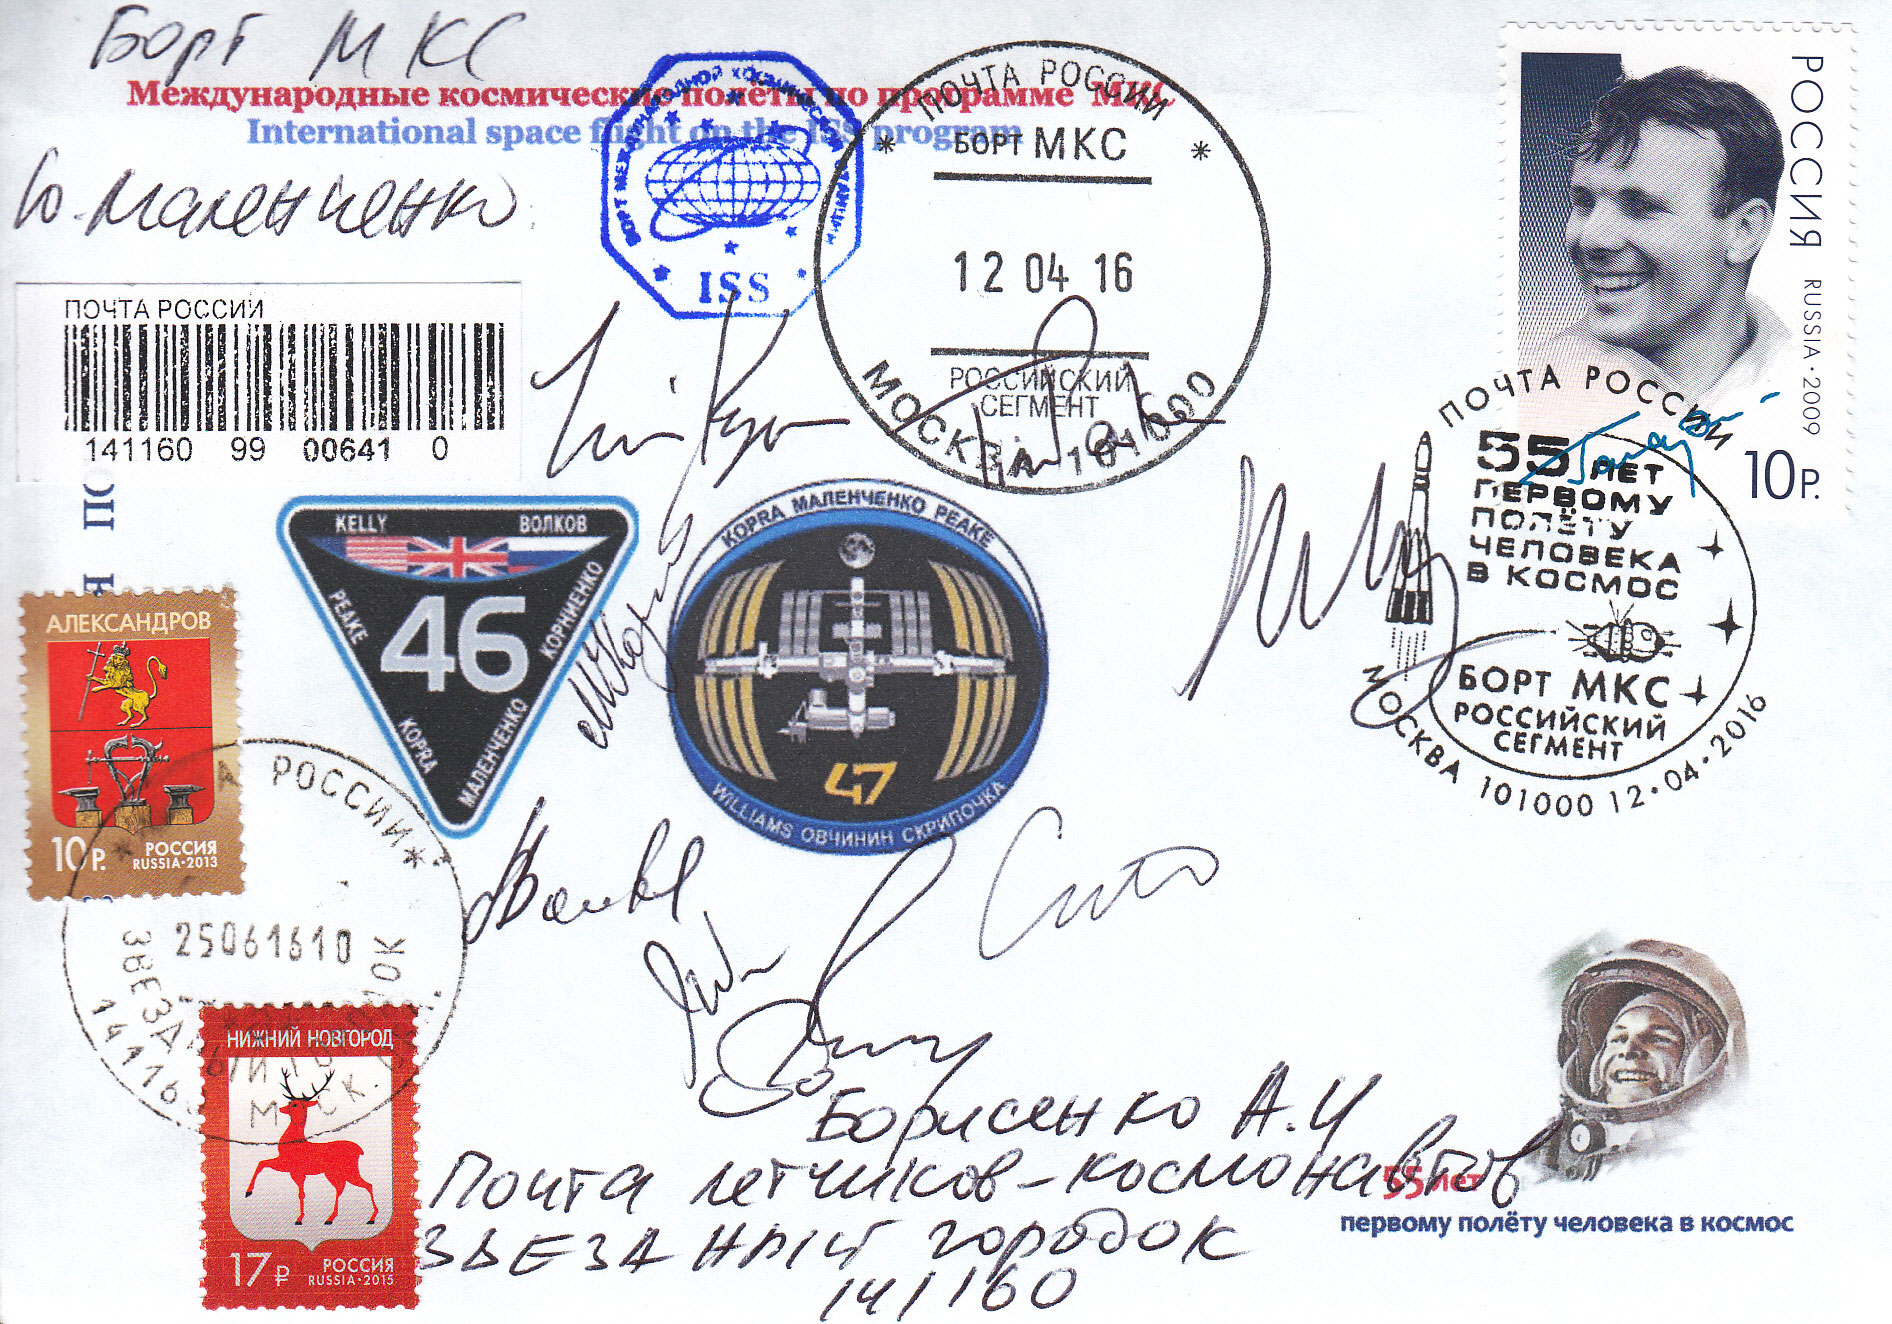 http://www.collectspace.com/review/cosmos-walter/gagarin55_iss_cancel01-lg.jpg